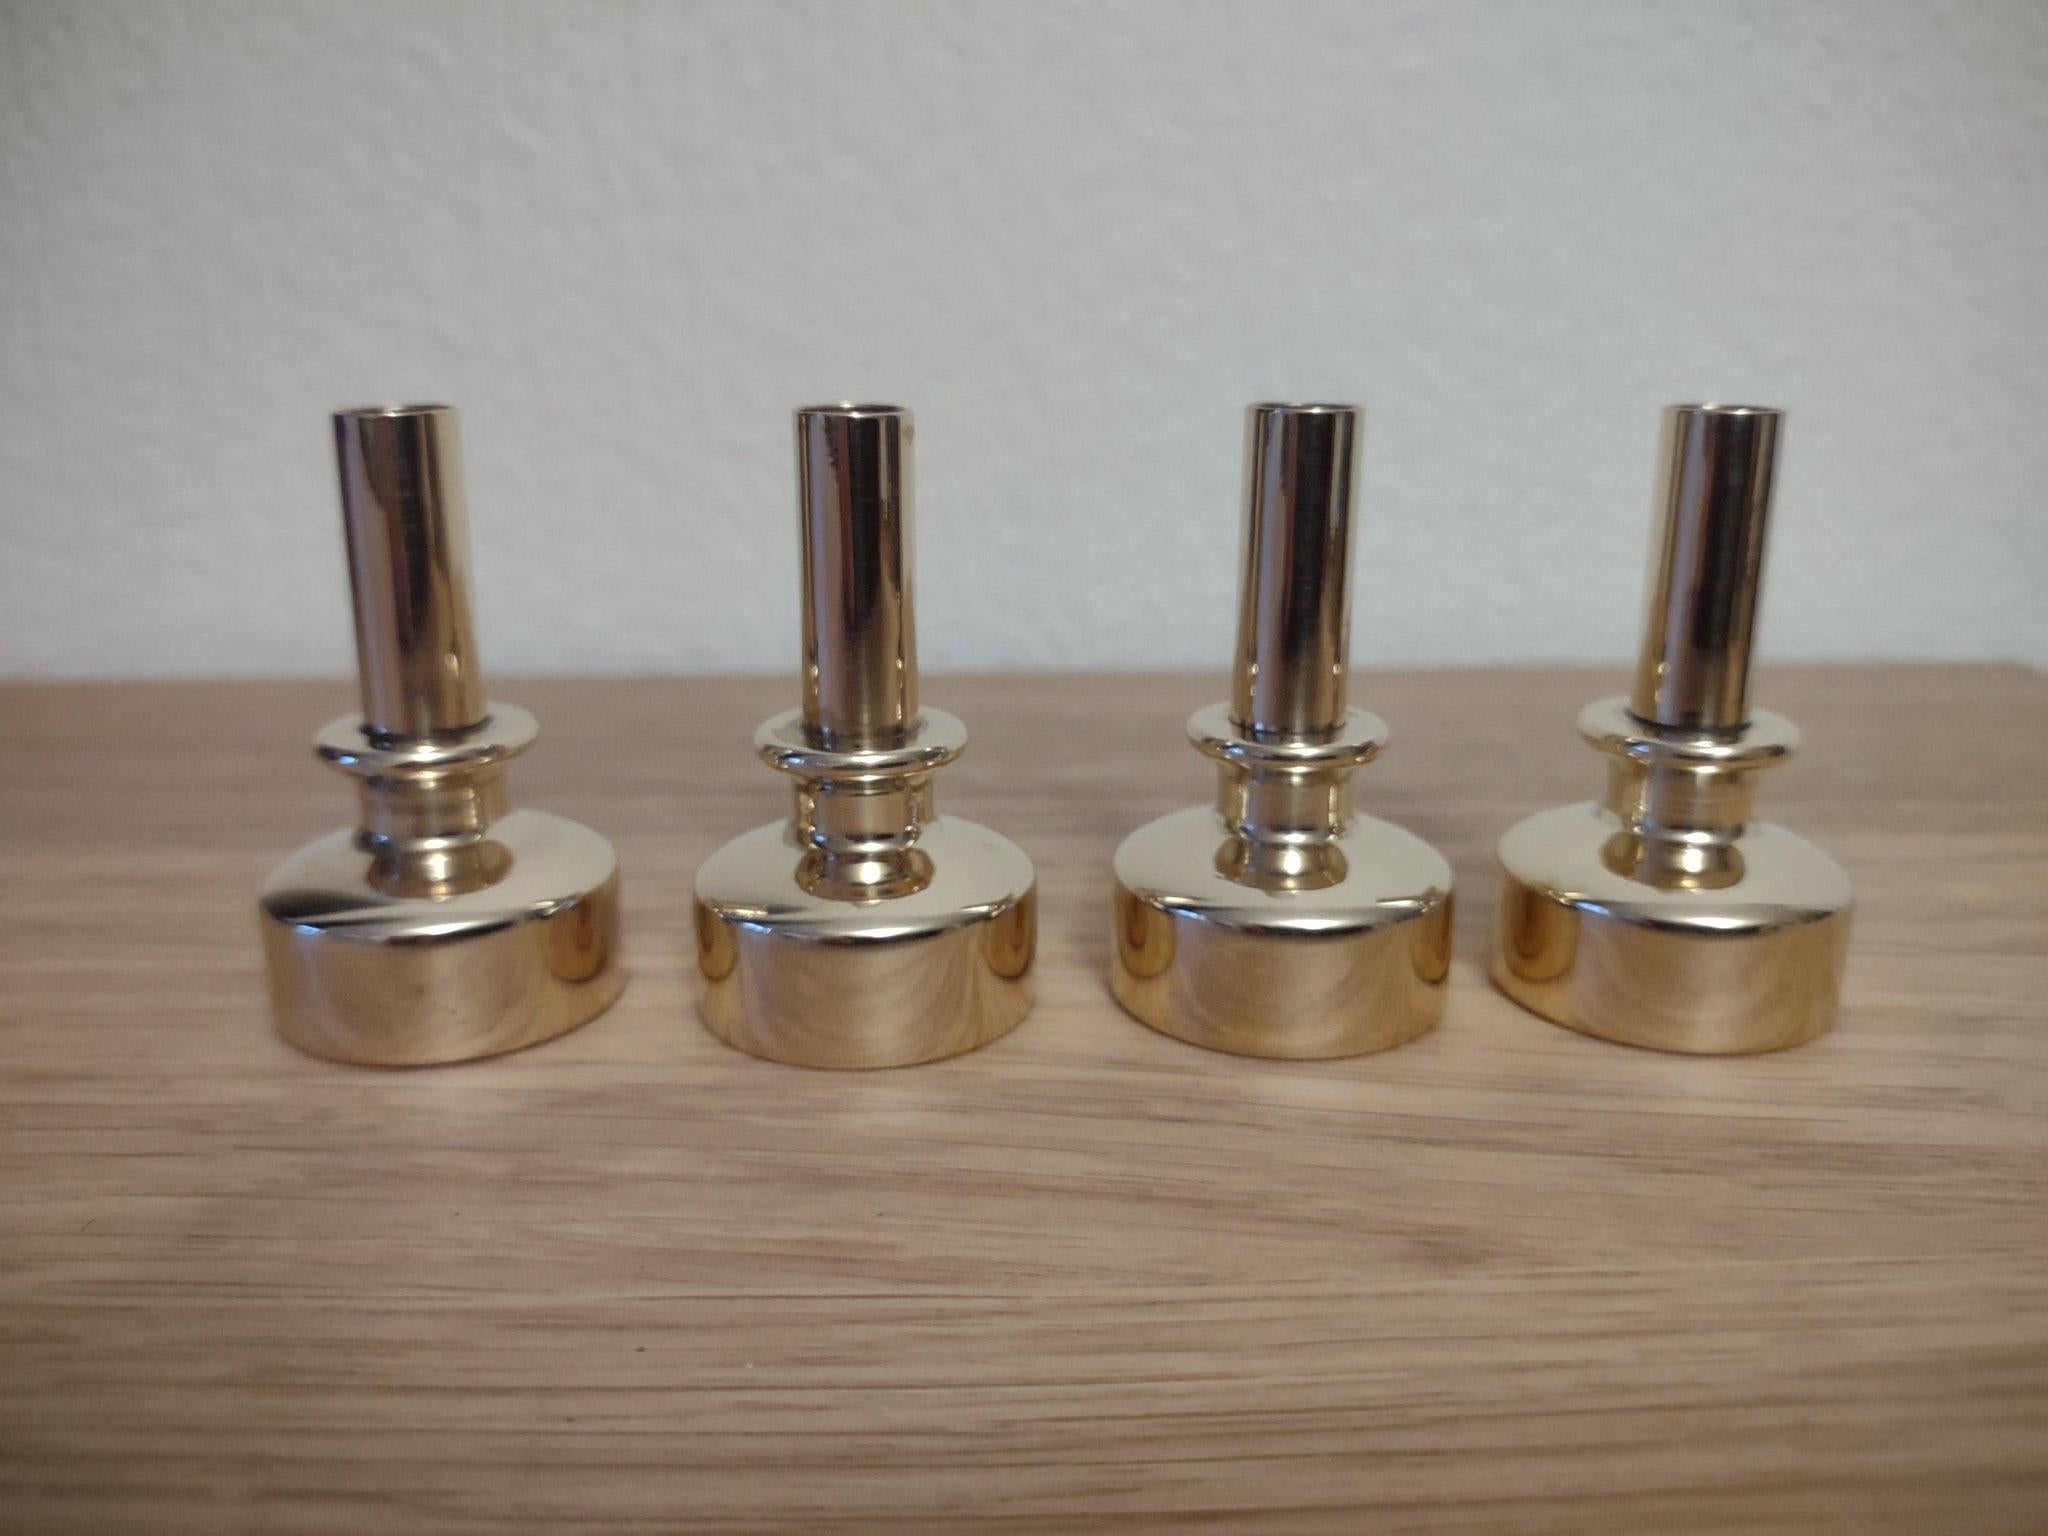 Set of 4 model L92 brass candlesticks by Hans Agne Jakobsson for Markaryd, Sweden, 1960s, in very good condition.